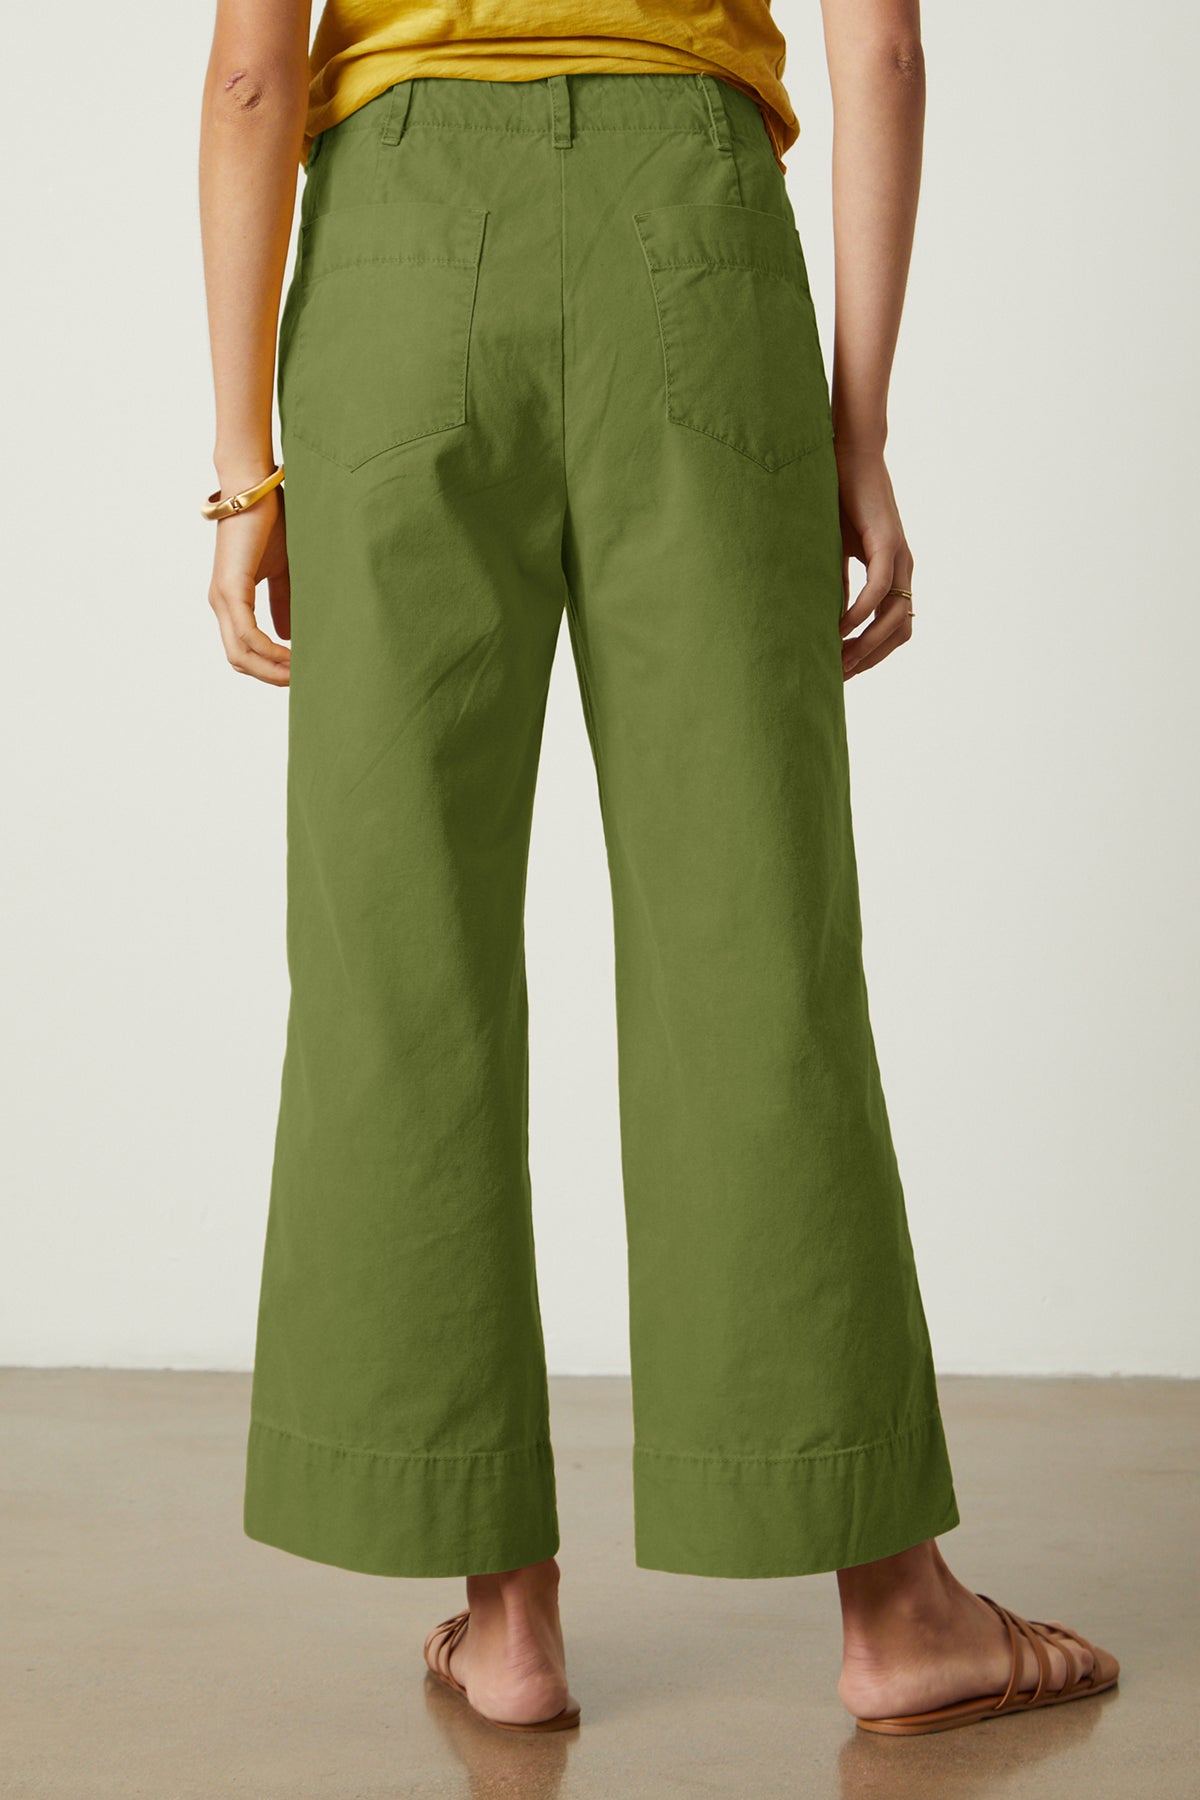 Mya Pant in soft army green color back-25954630140097